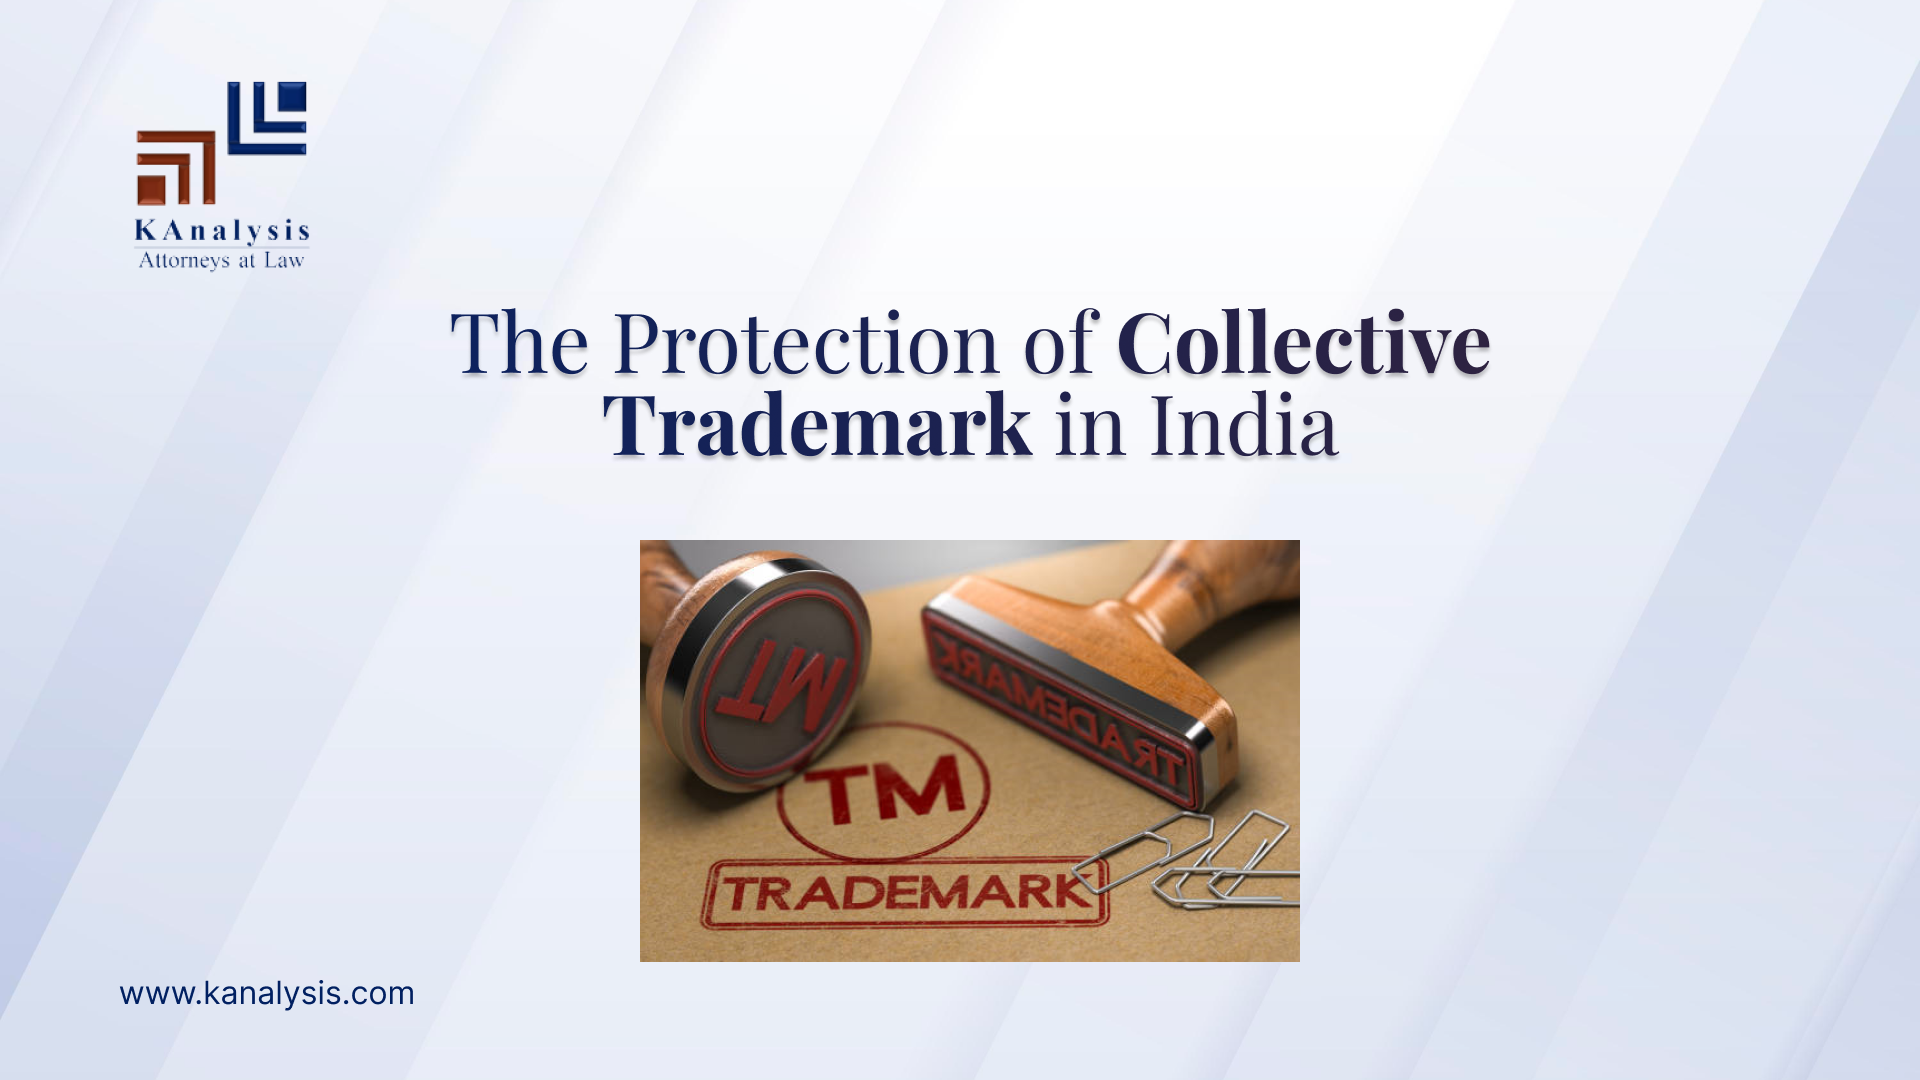 THE PROTECTION OF THE COLLECTIVE TRADEMARK IN INDIA